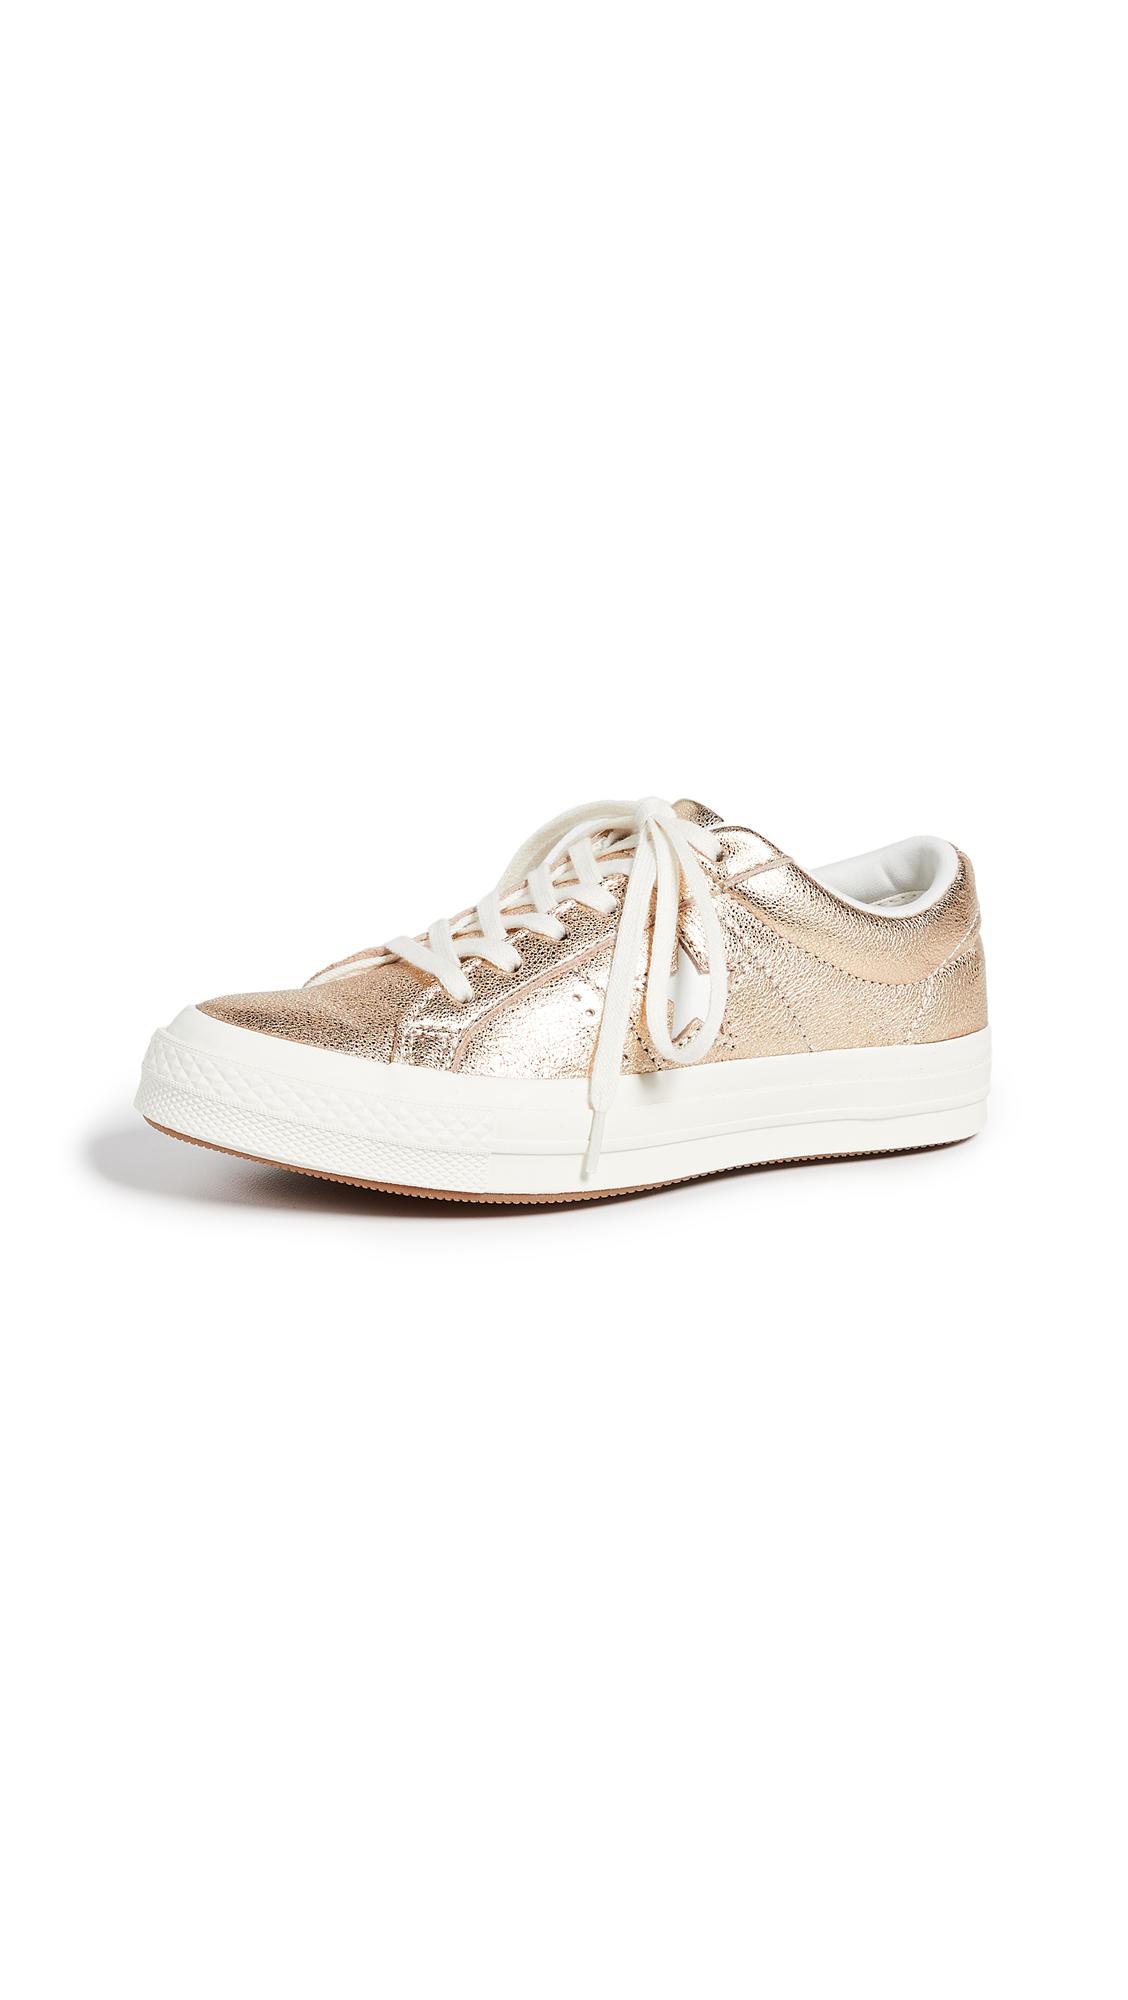 Converse One Star Ox Women's Shoes (trainers) In Gold in Metallic 